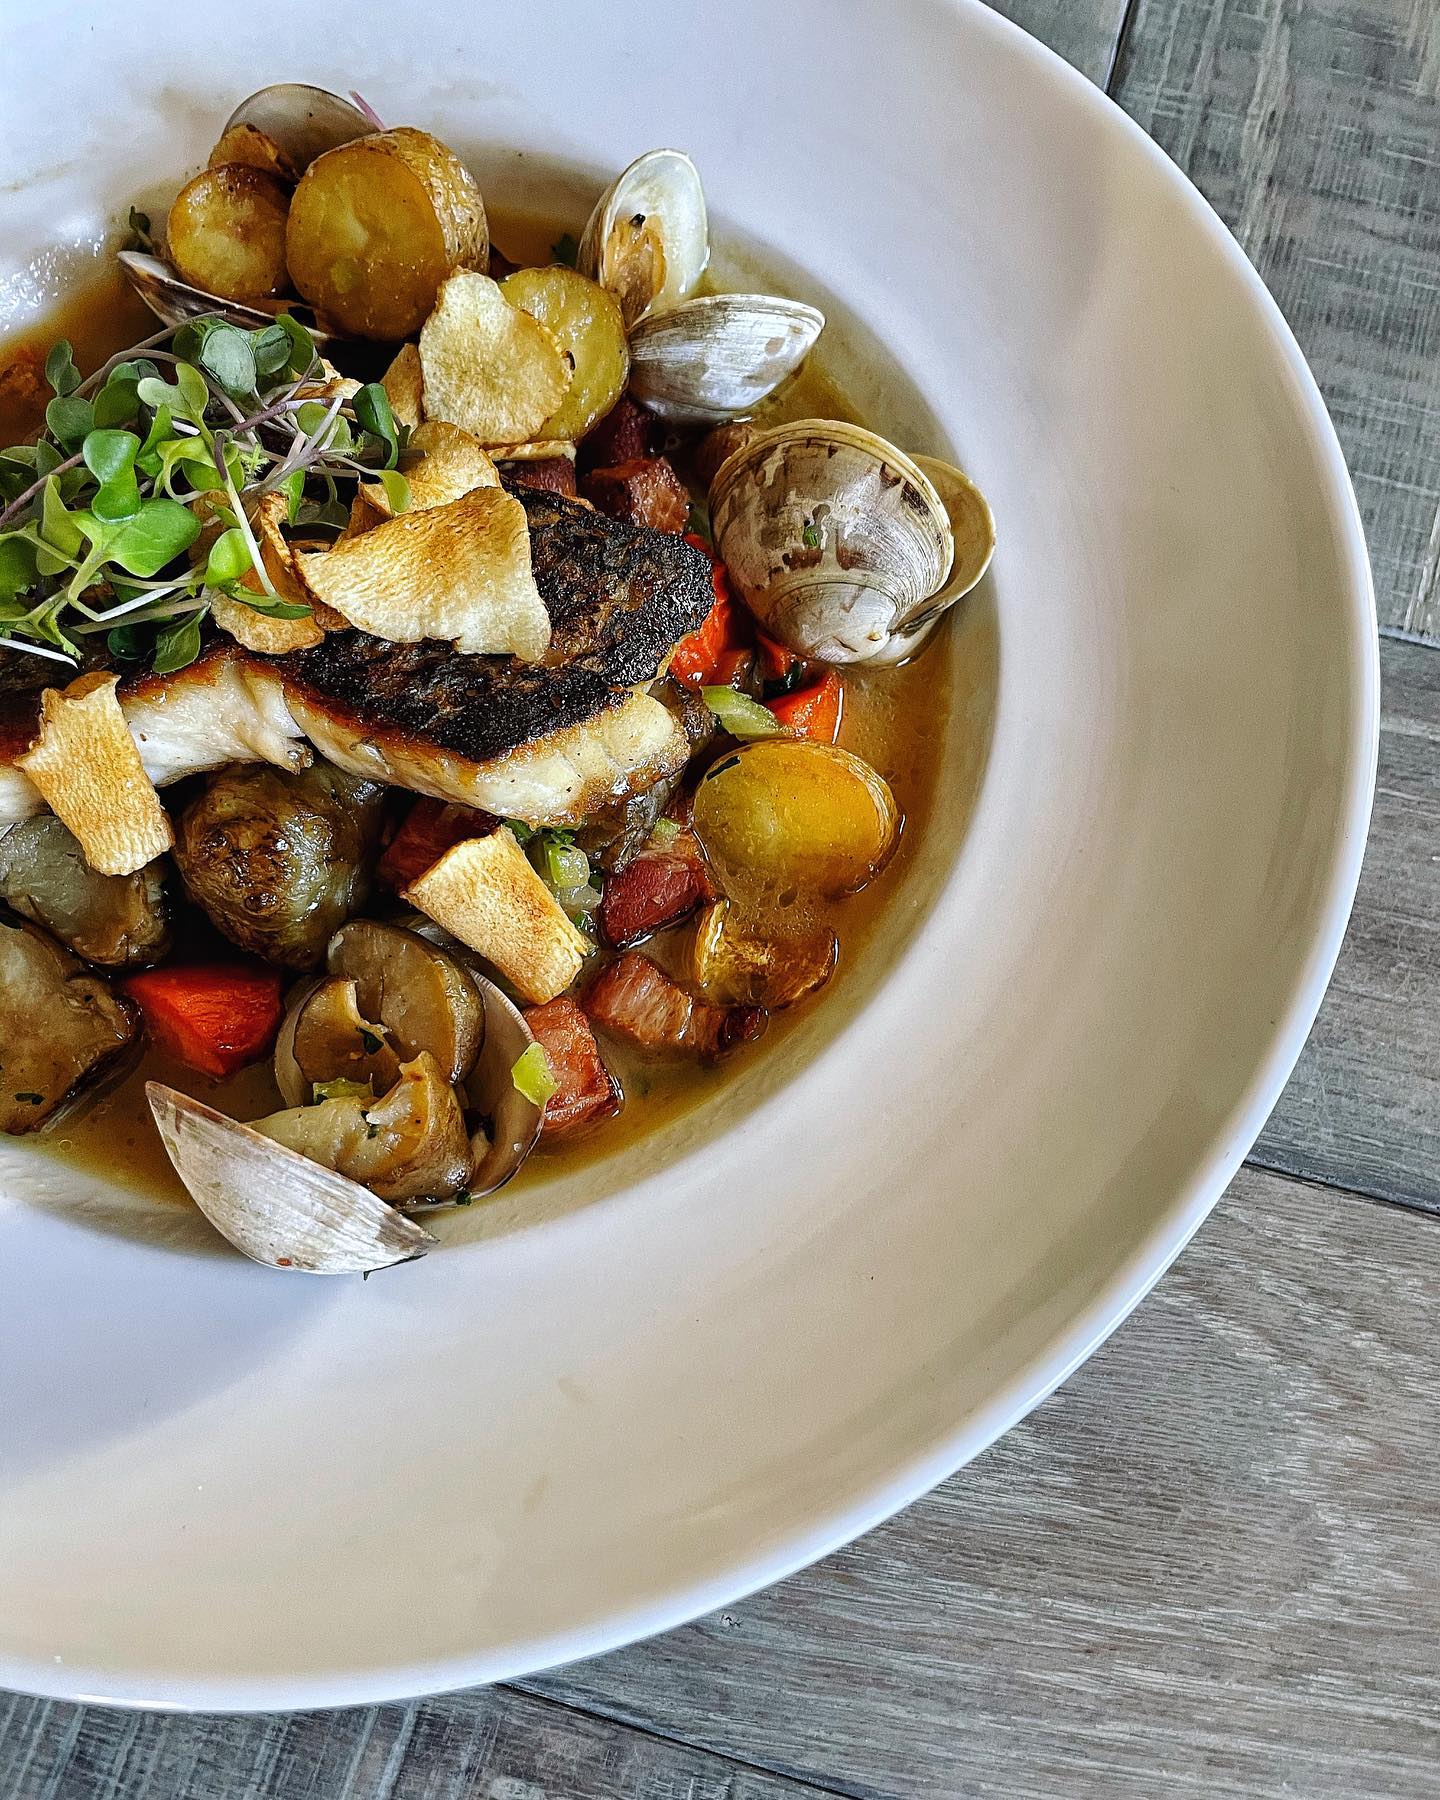 A bowl of chowder with clams, sunchokes, and potatoes garnished with herbs and sun-dried tomatoes from Table and Main in Roswell, GA